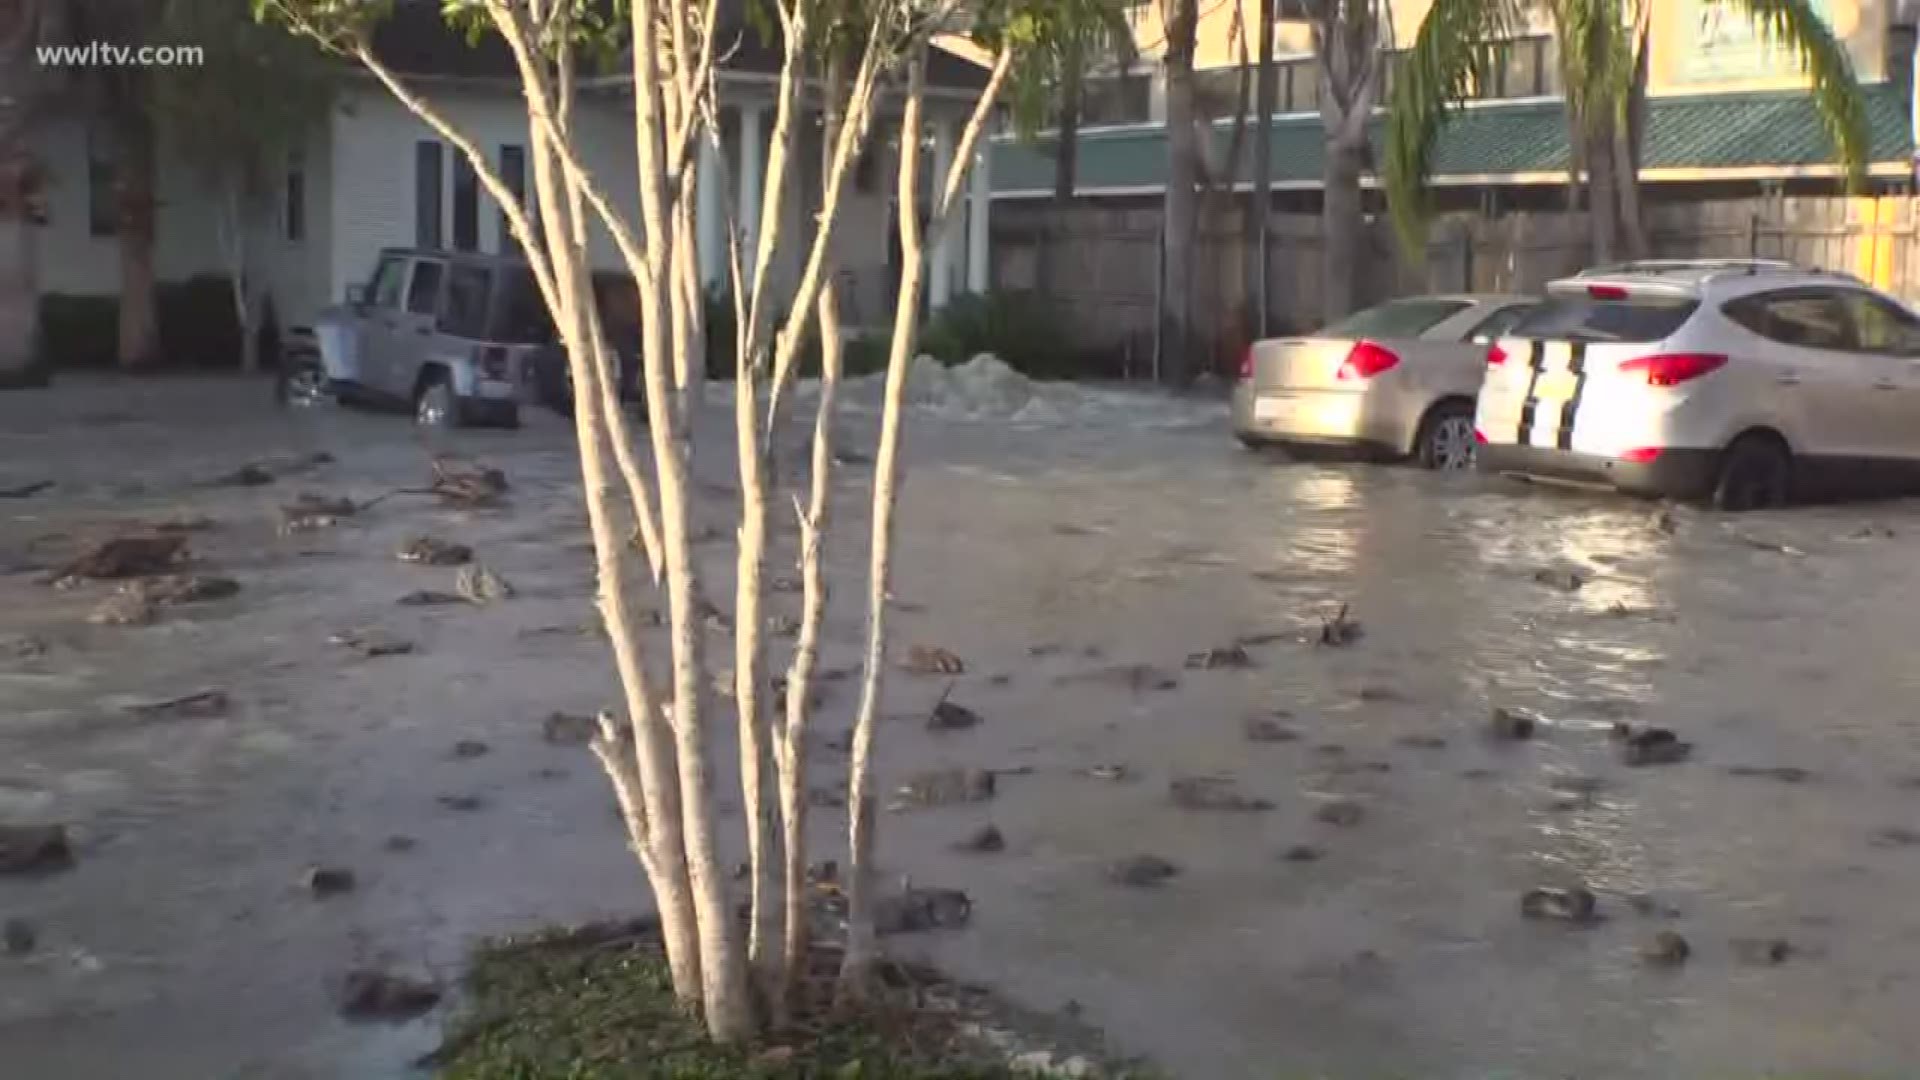 Water gushing uptown from a broken main was creating headaches for students and residents near Tulane's Yulman Stadium on Claiborne Avenue Friday.